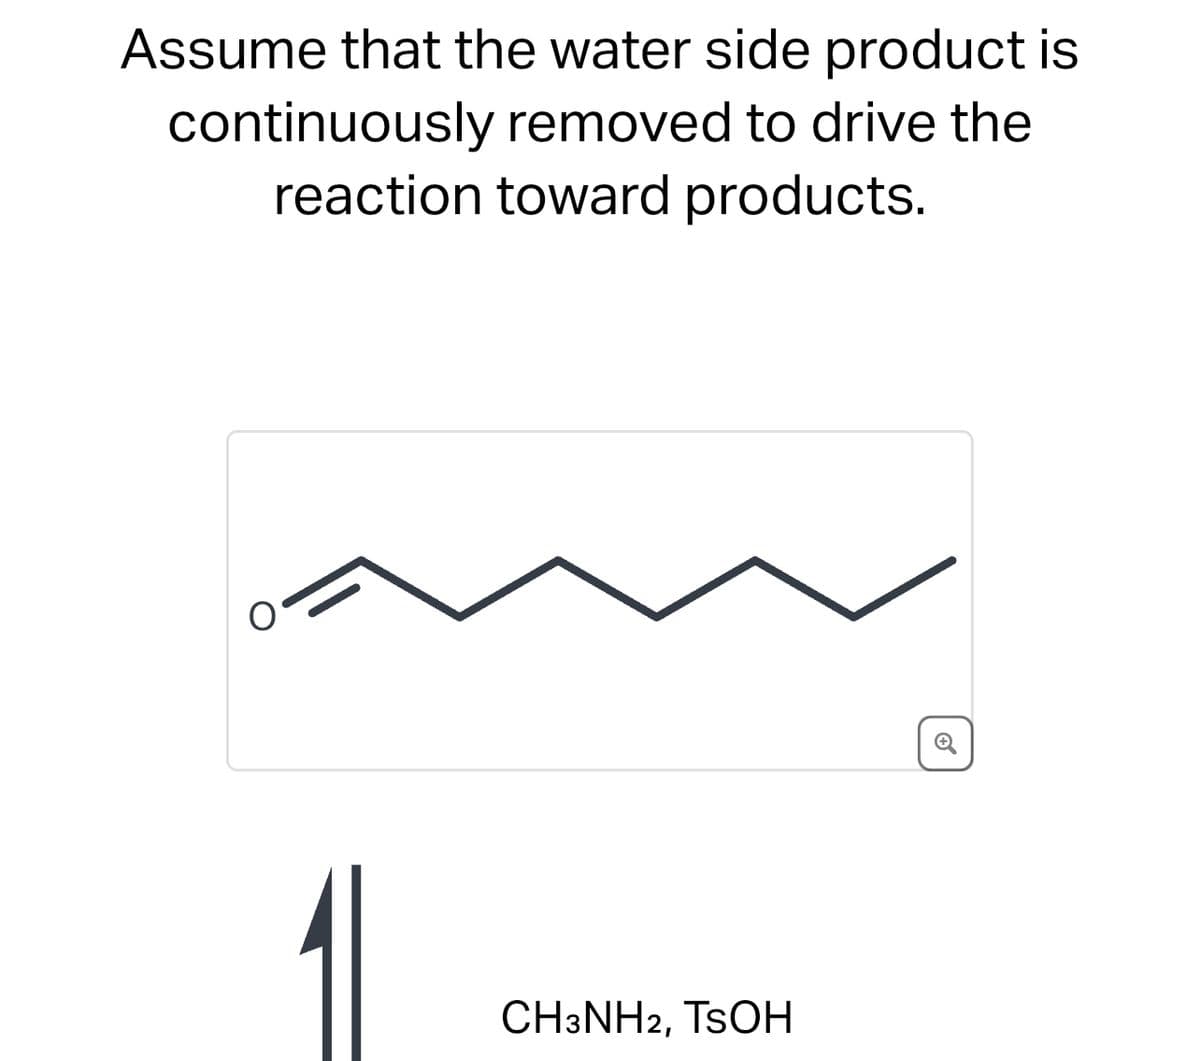 Assume that the water side product is
continuously removed to drive the
reaction toward products.
CH3NH2, TSOH
C